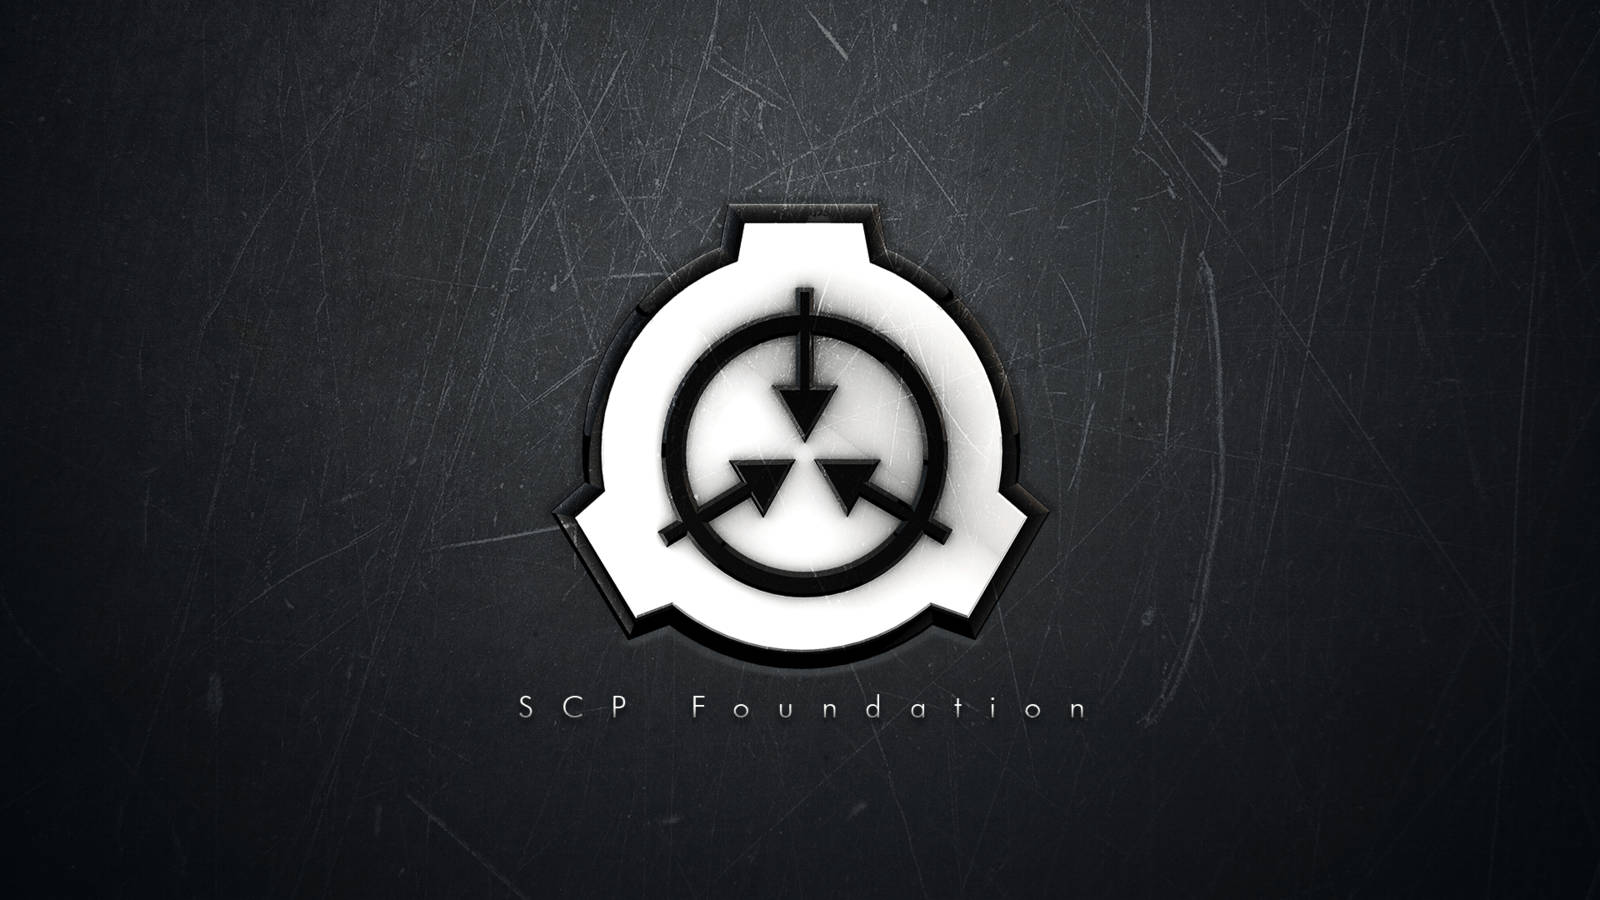 Scp Logo In Scratched Background